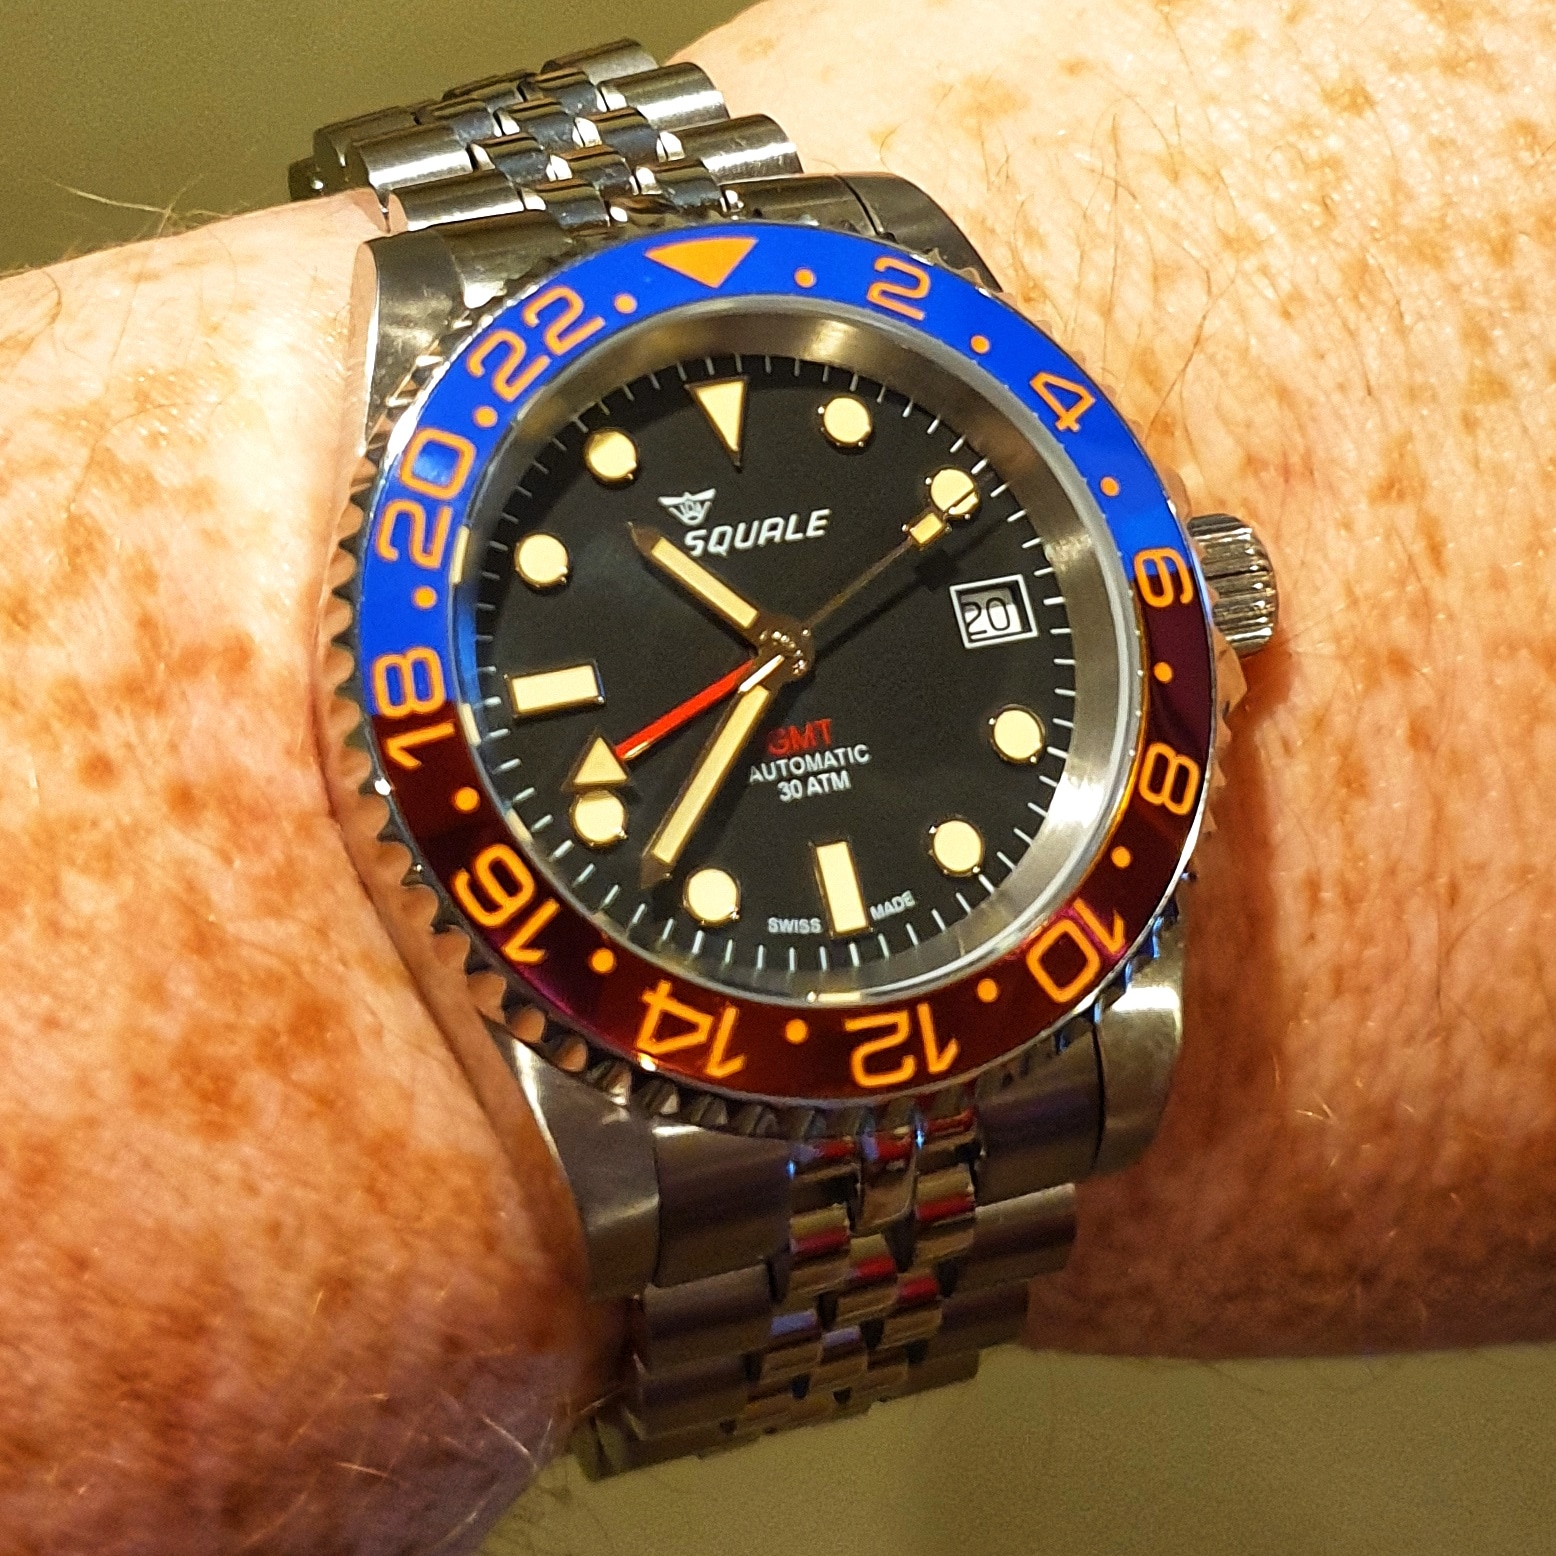 Owner Review: Squale 30 Atmos GMT 1545 – A beautiful watch with flaws